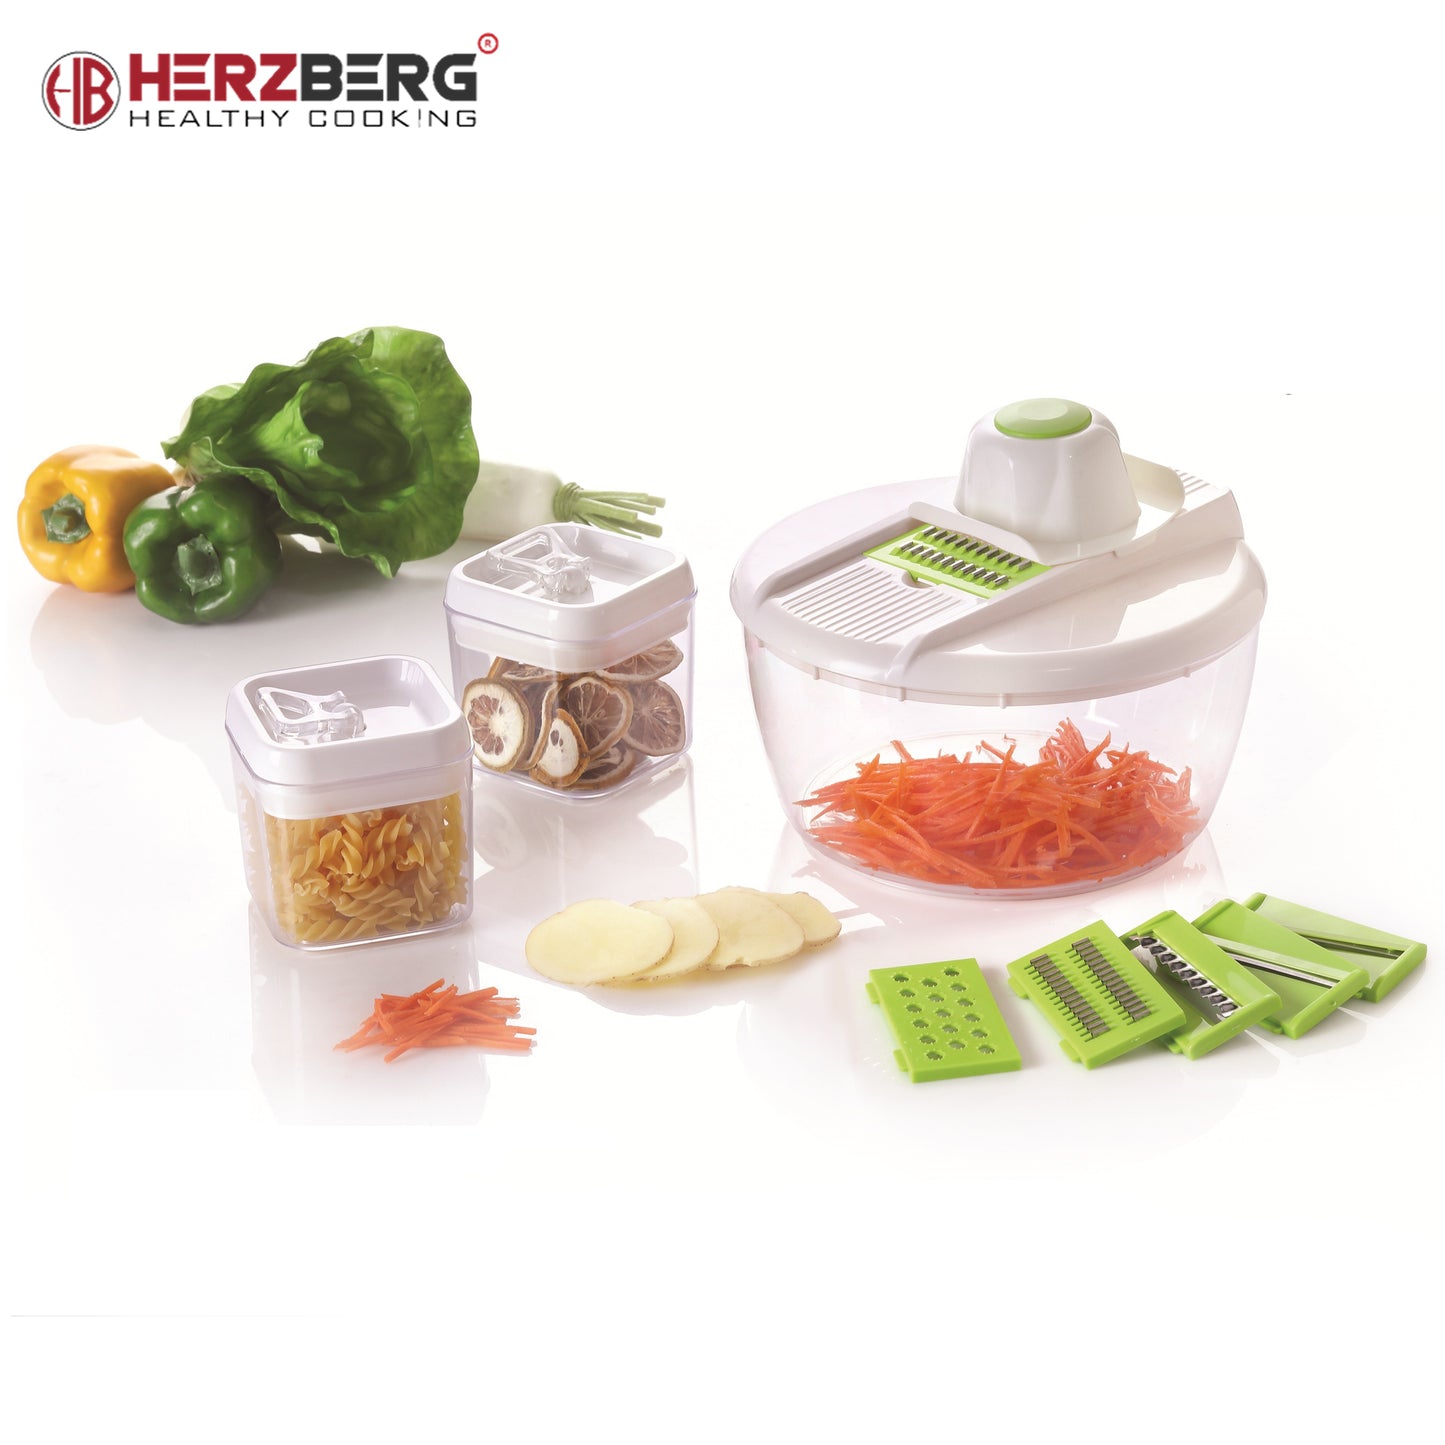 Herzberg HG-8032: Vegetable Slicer with Bowl and Storage Container Set